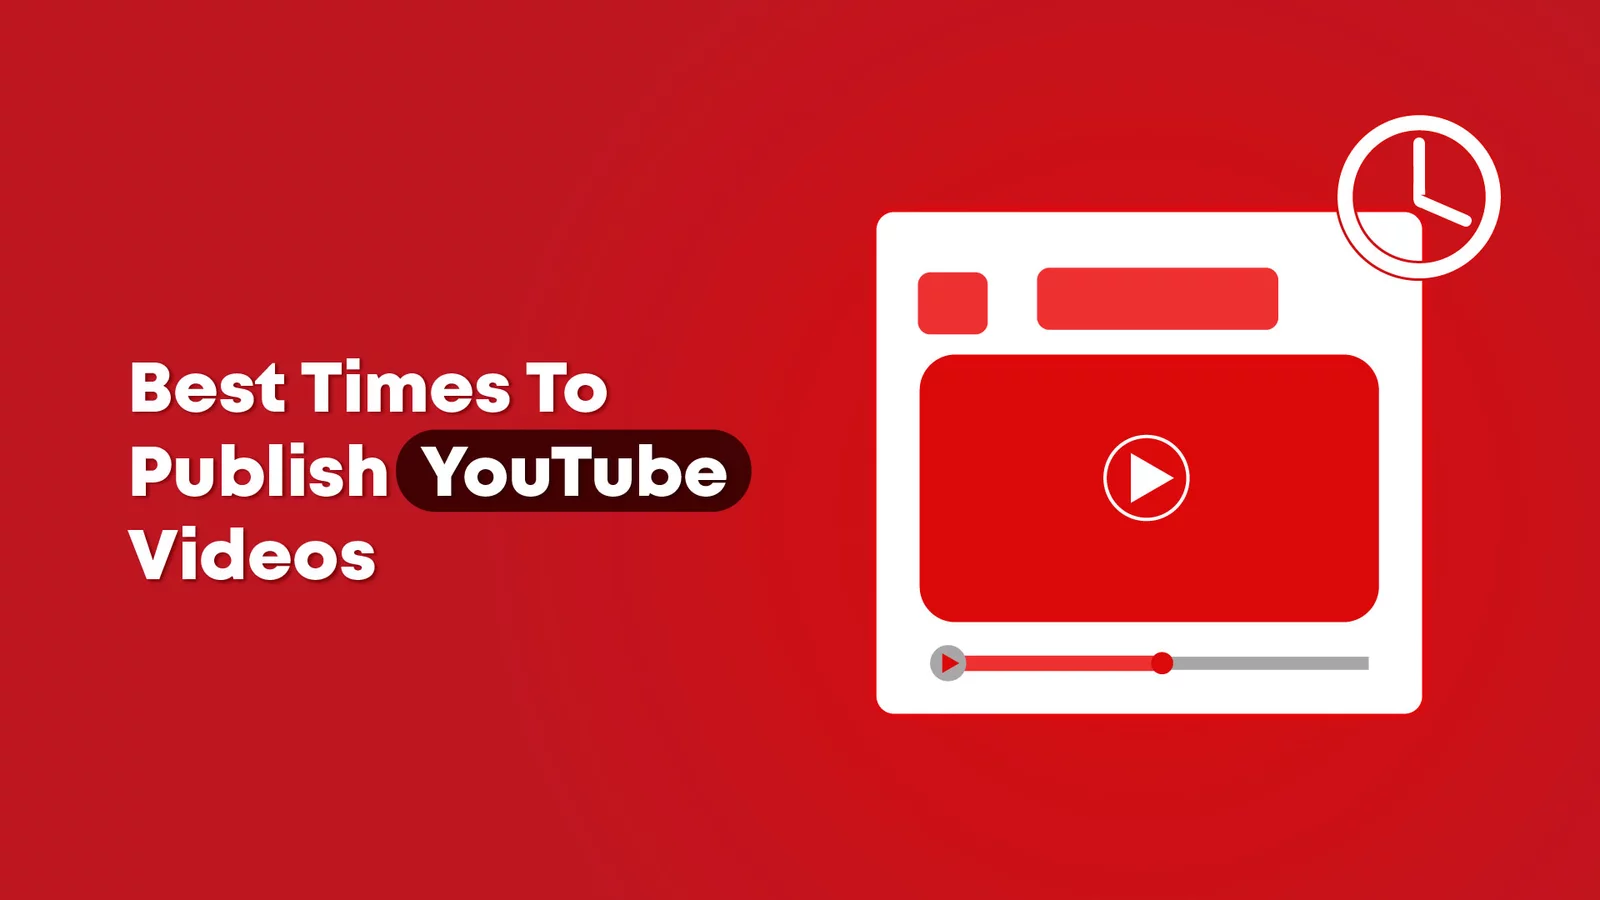 What is The Best Time To Upload YouTube Videos in India?